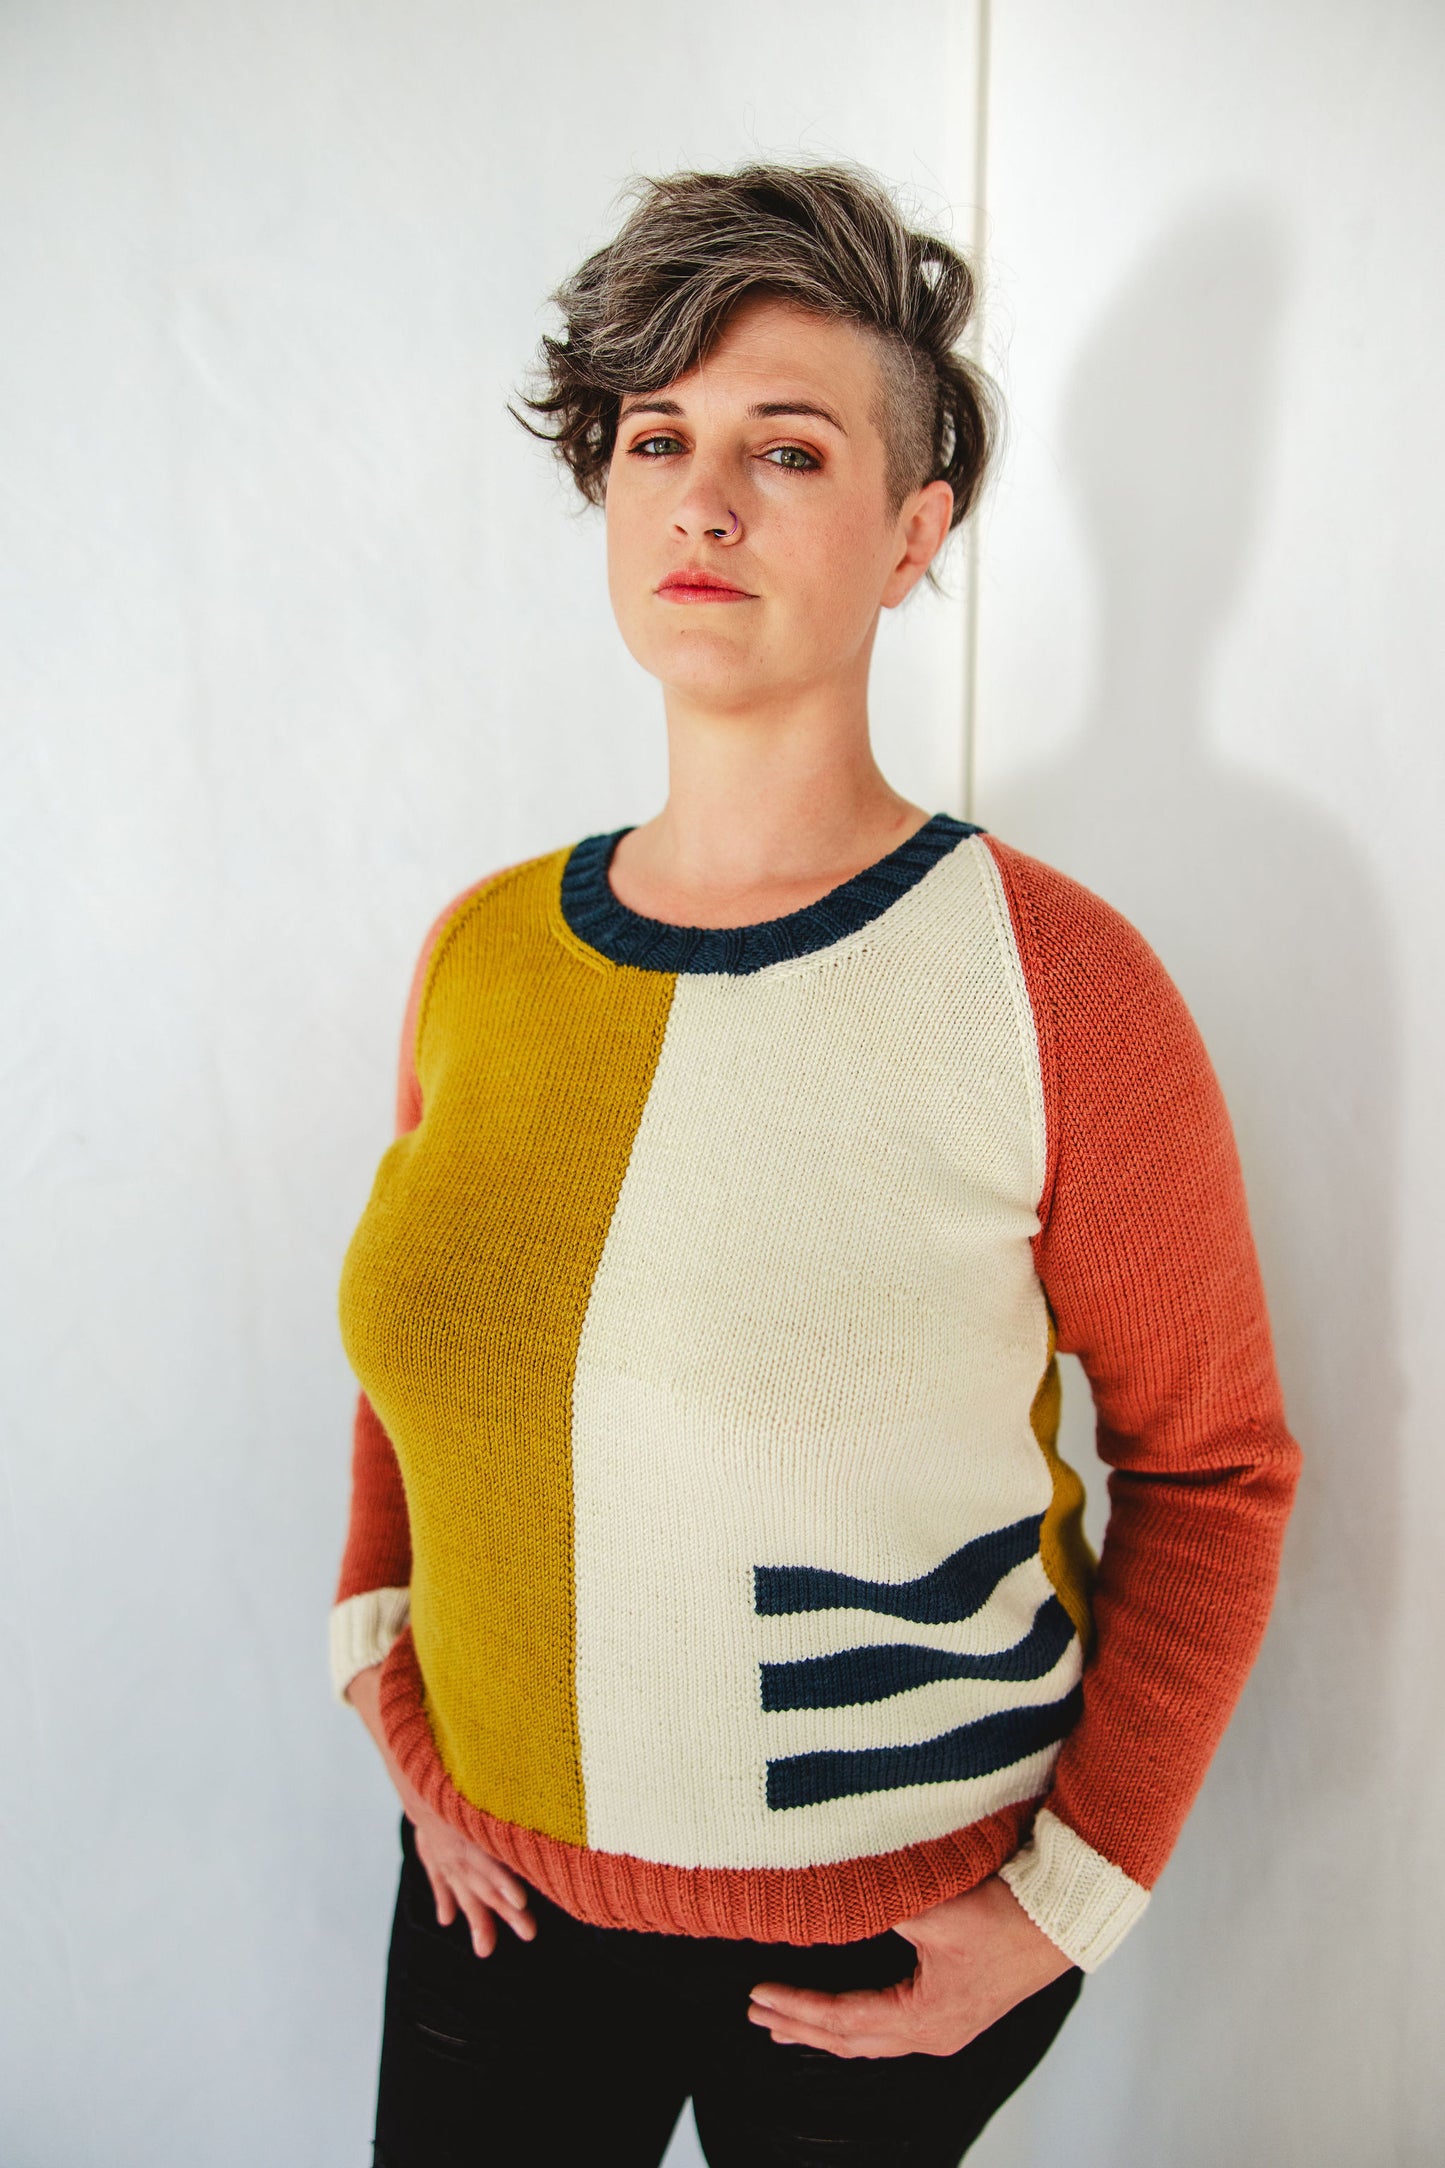 Jen stands against a white wall, looking towards the camera. She wears a yellow, white, red, and blue colorblock knit sweater (the Study Group sweater) with black pants.